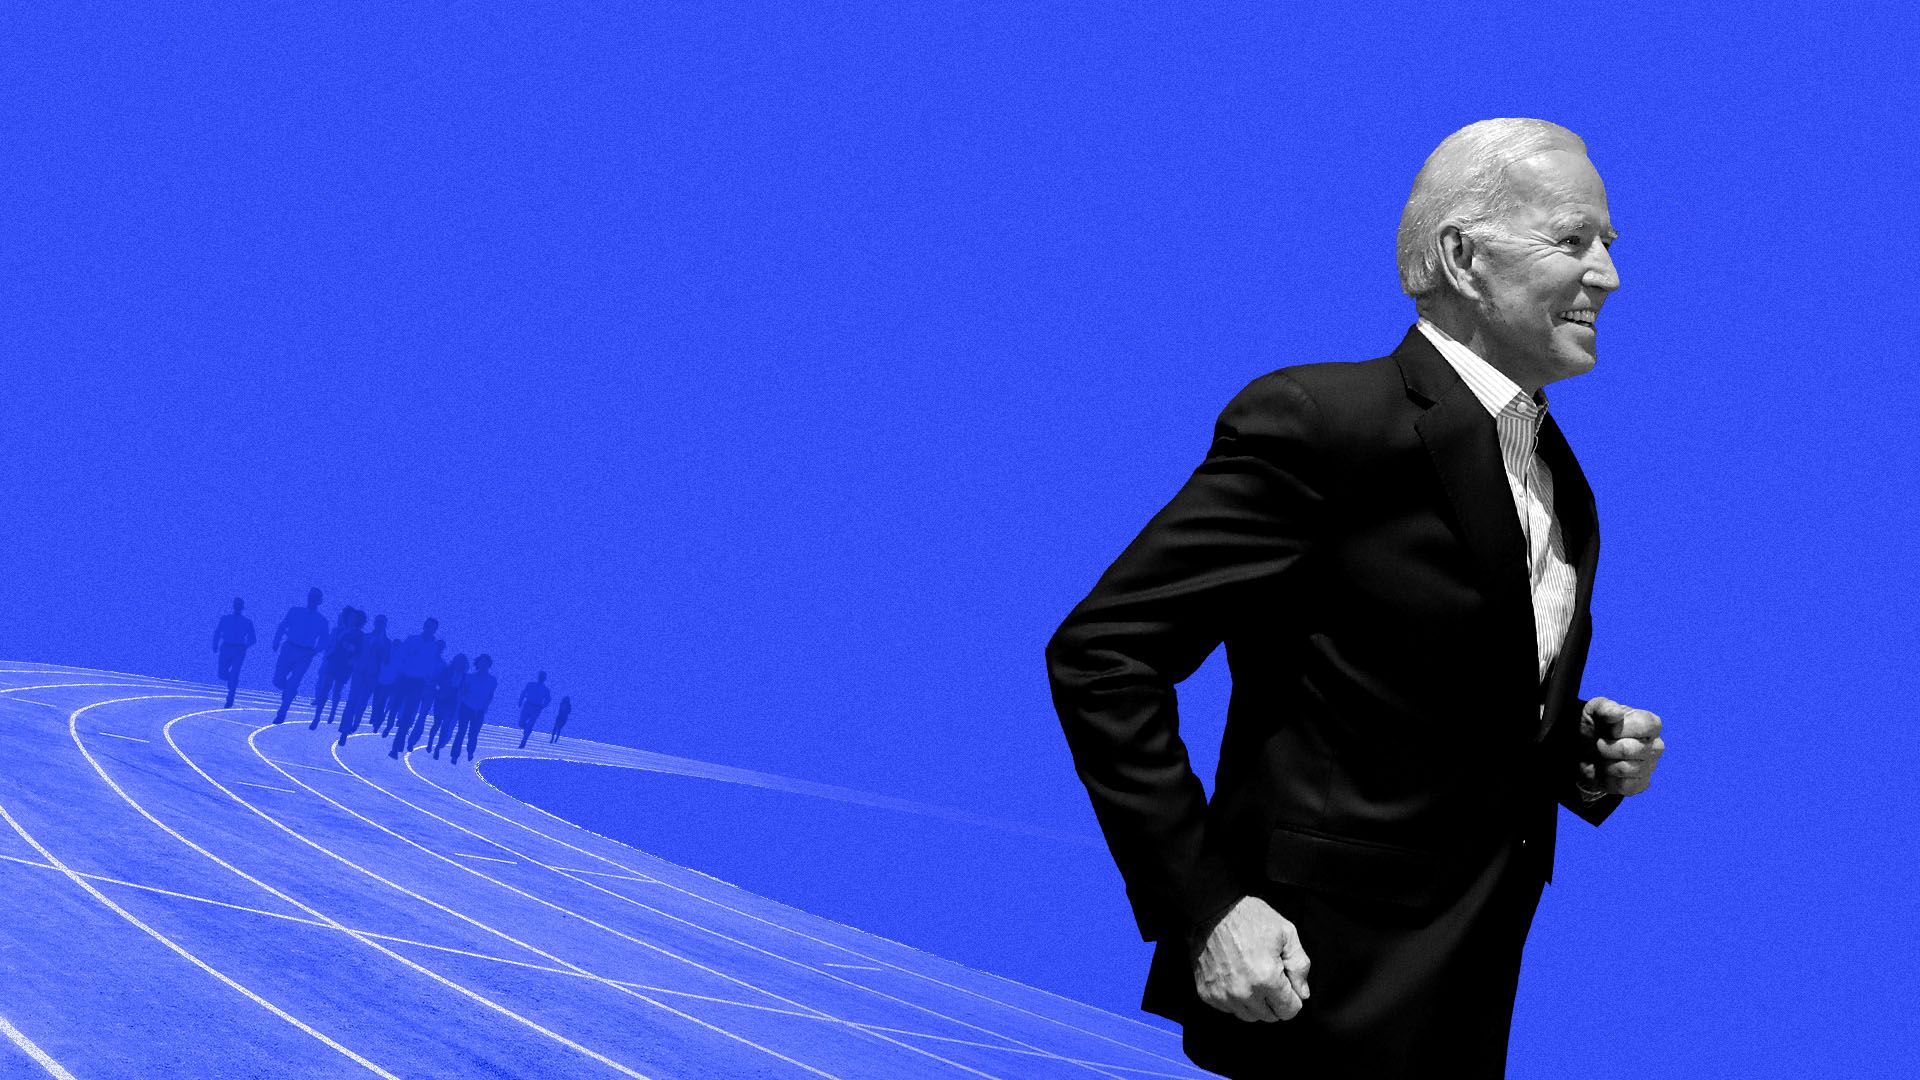 In this illustration, Biden outpaces other runners on a race track.